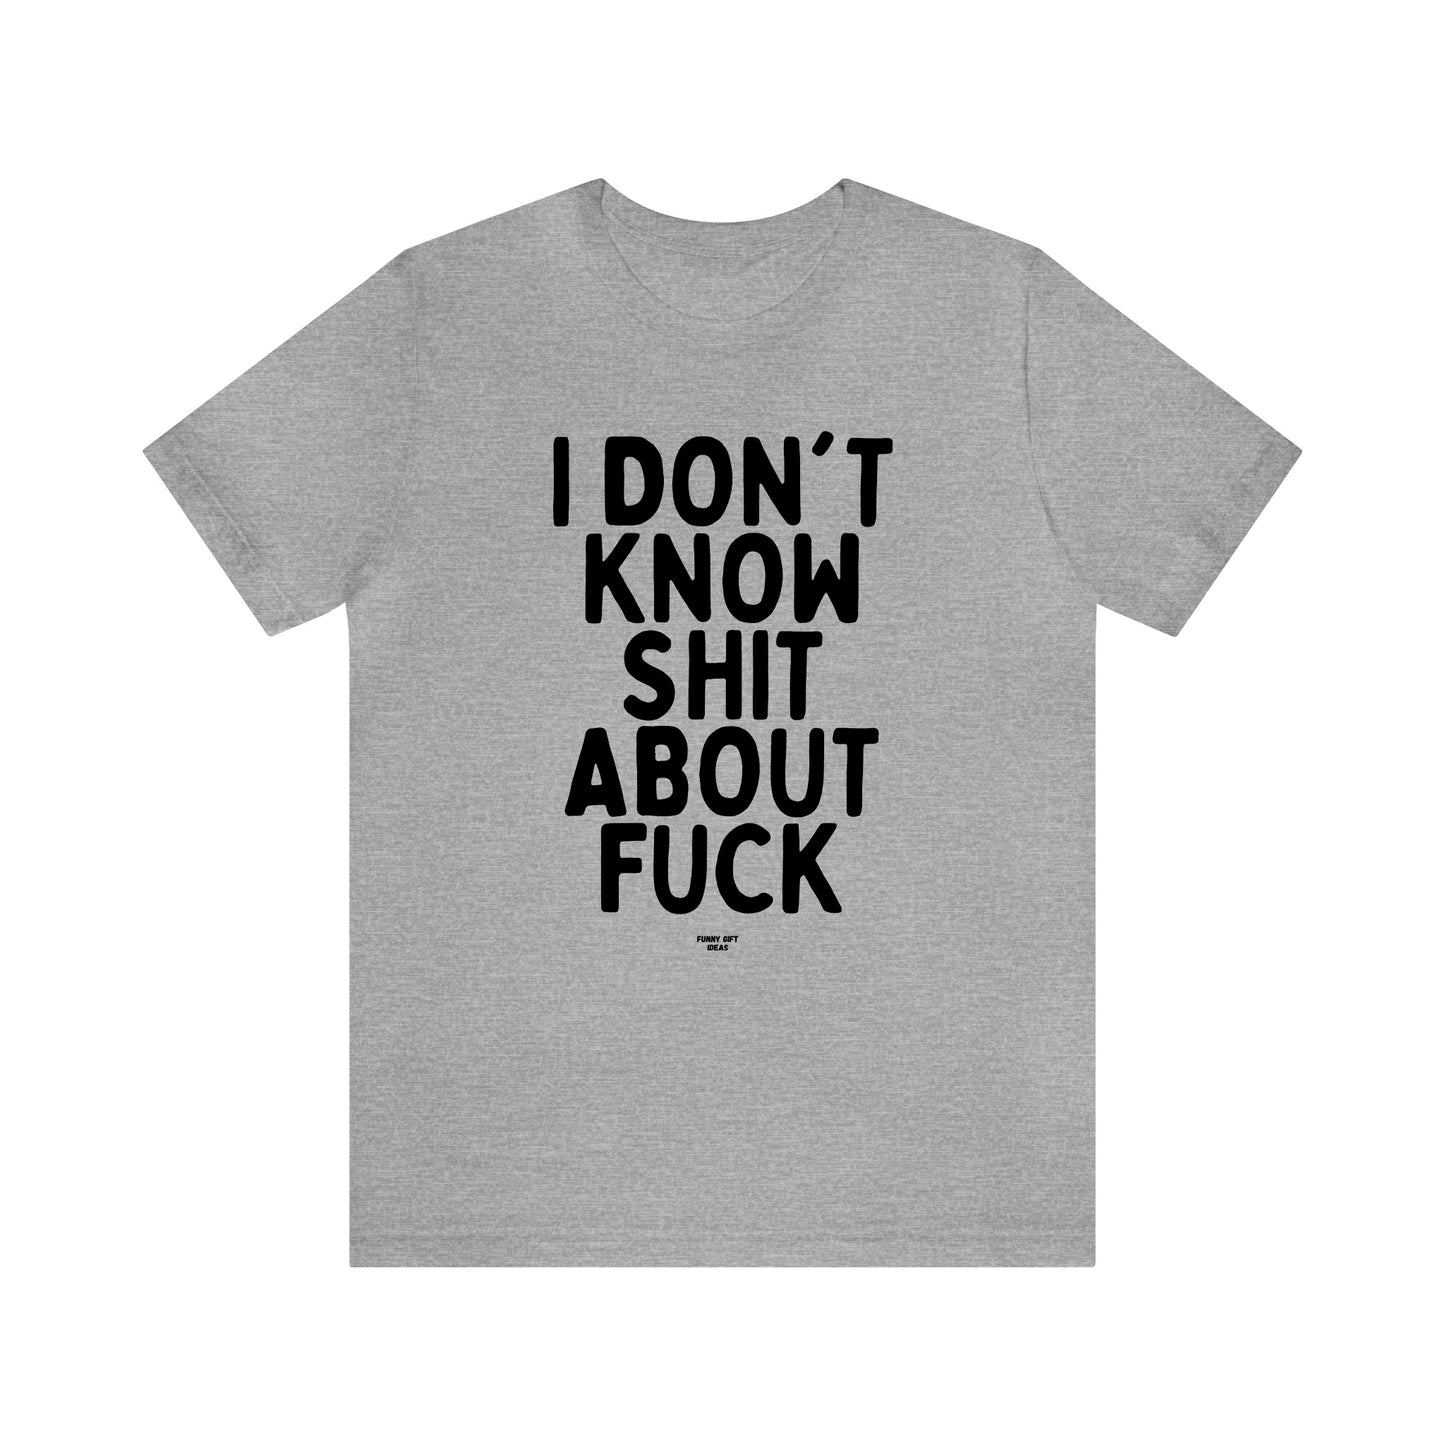 Mens T Shirts - I Don't Know Shit About Fuck - Funny Men T Shirts